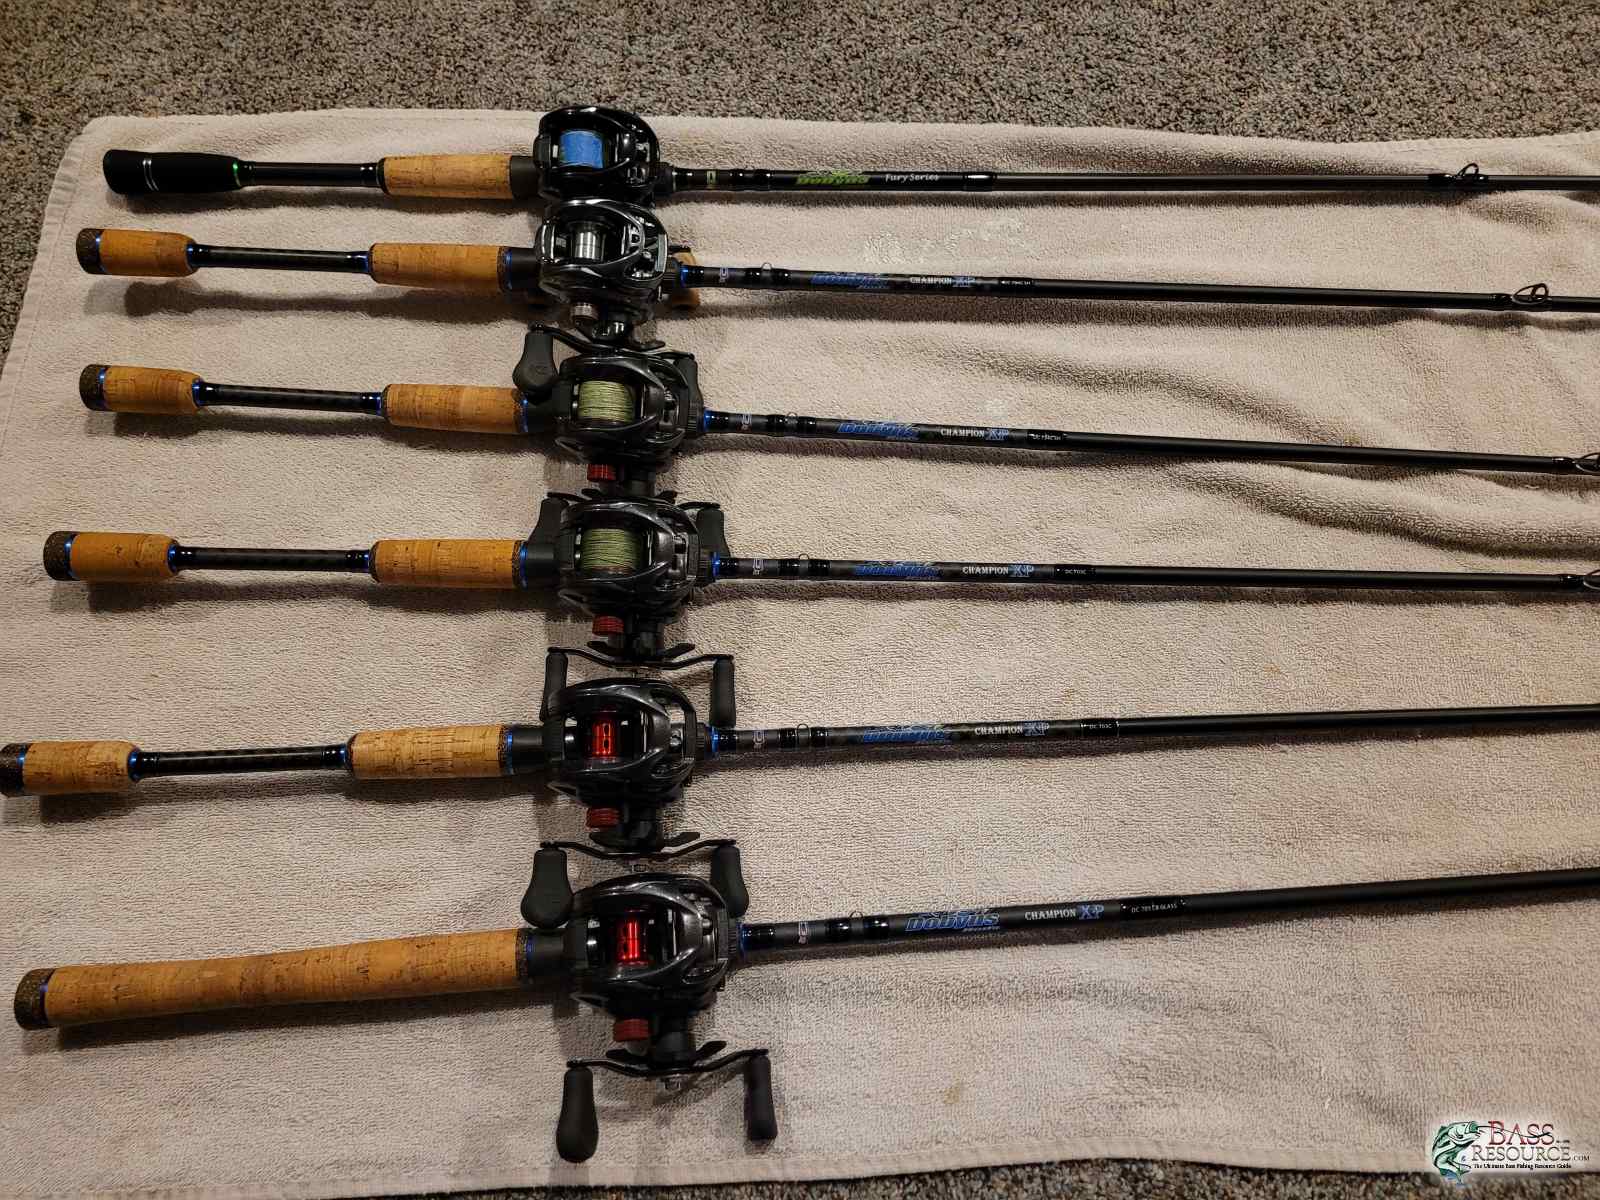 What's in your Dobyns Arsenal? - Fishing Rods, Reels, Line, and Knots - Bass  Fishing Forums